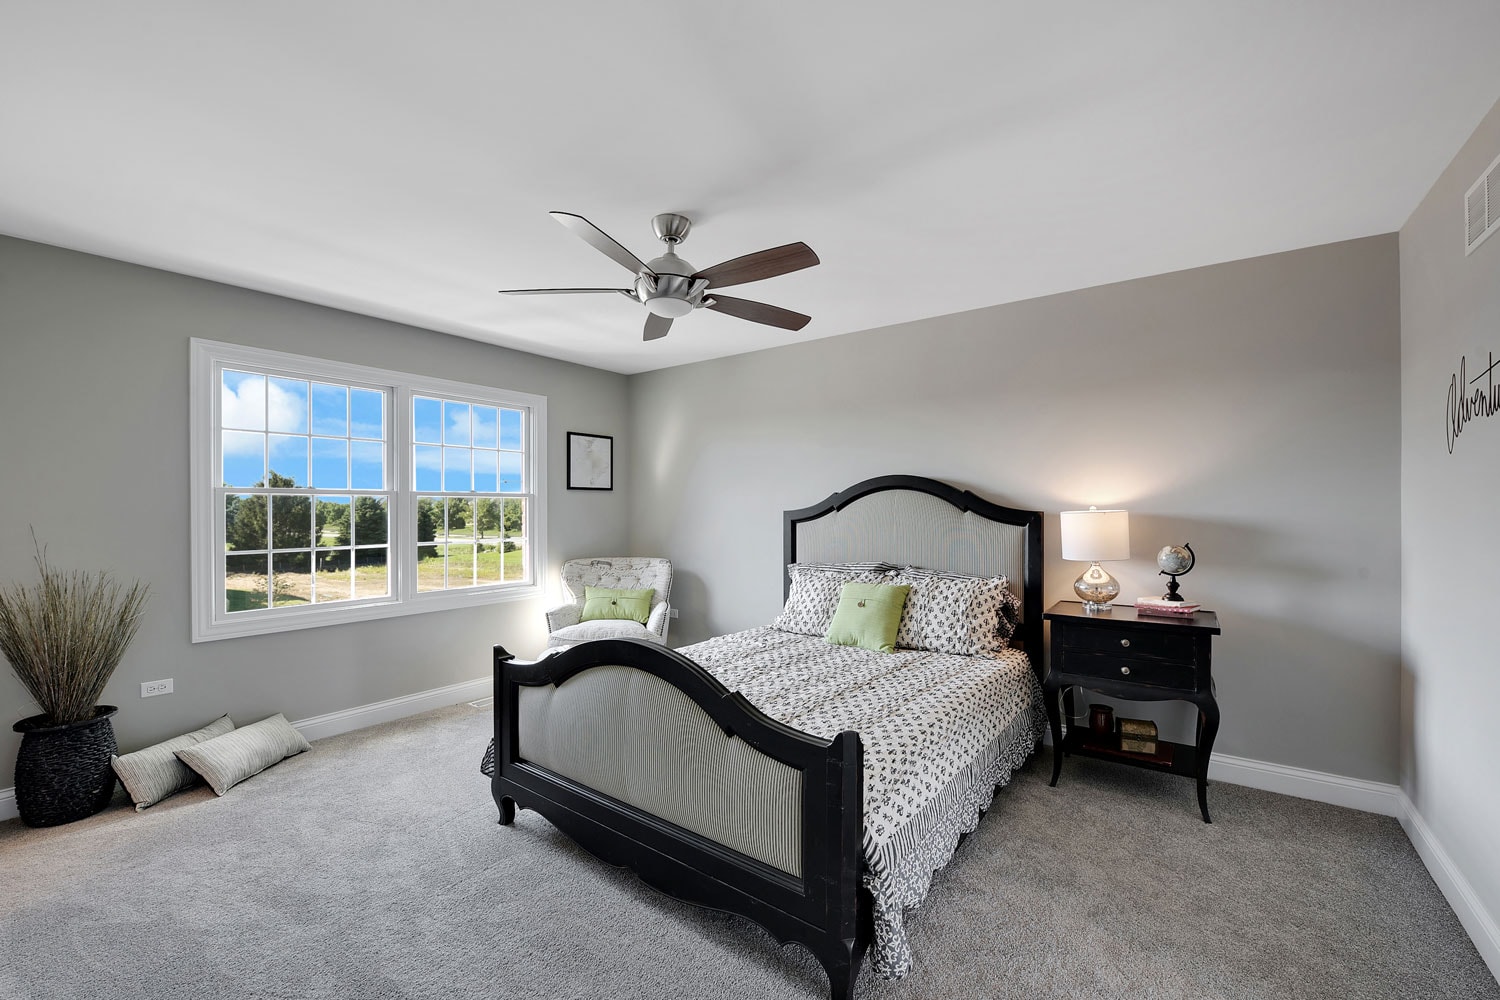 Gray and white inspired bedroom with a ceiling fan, black modern designed bed with black and white beddings